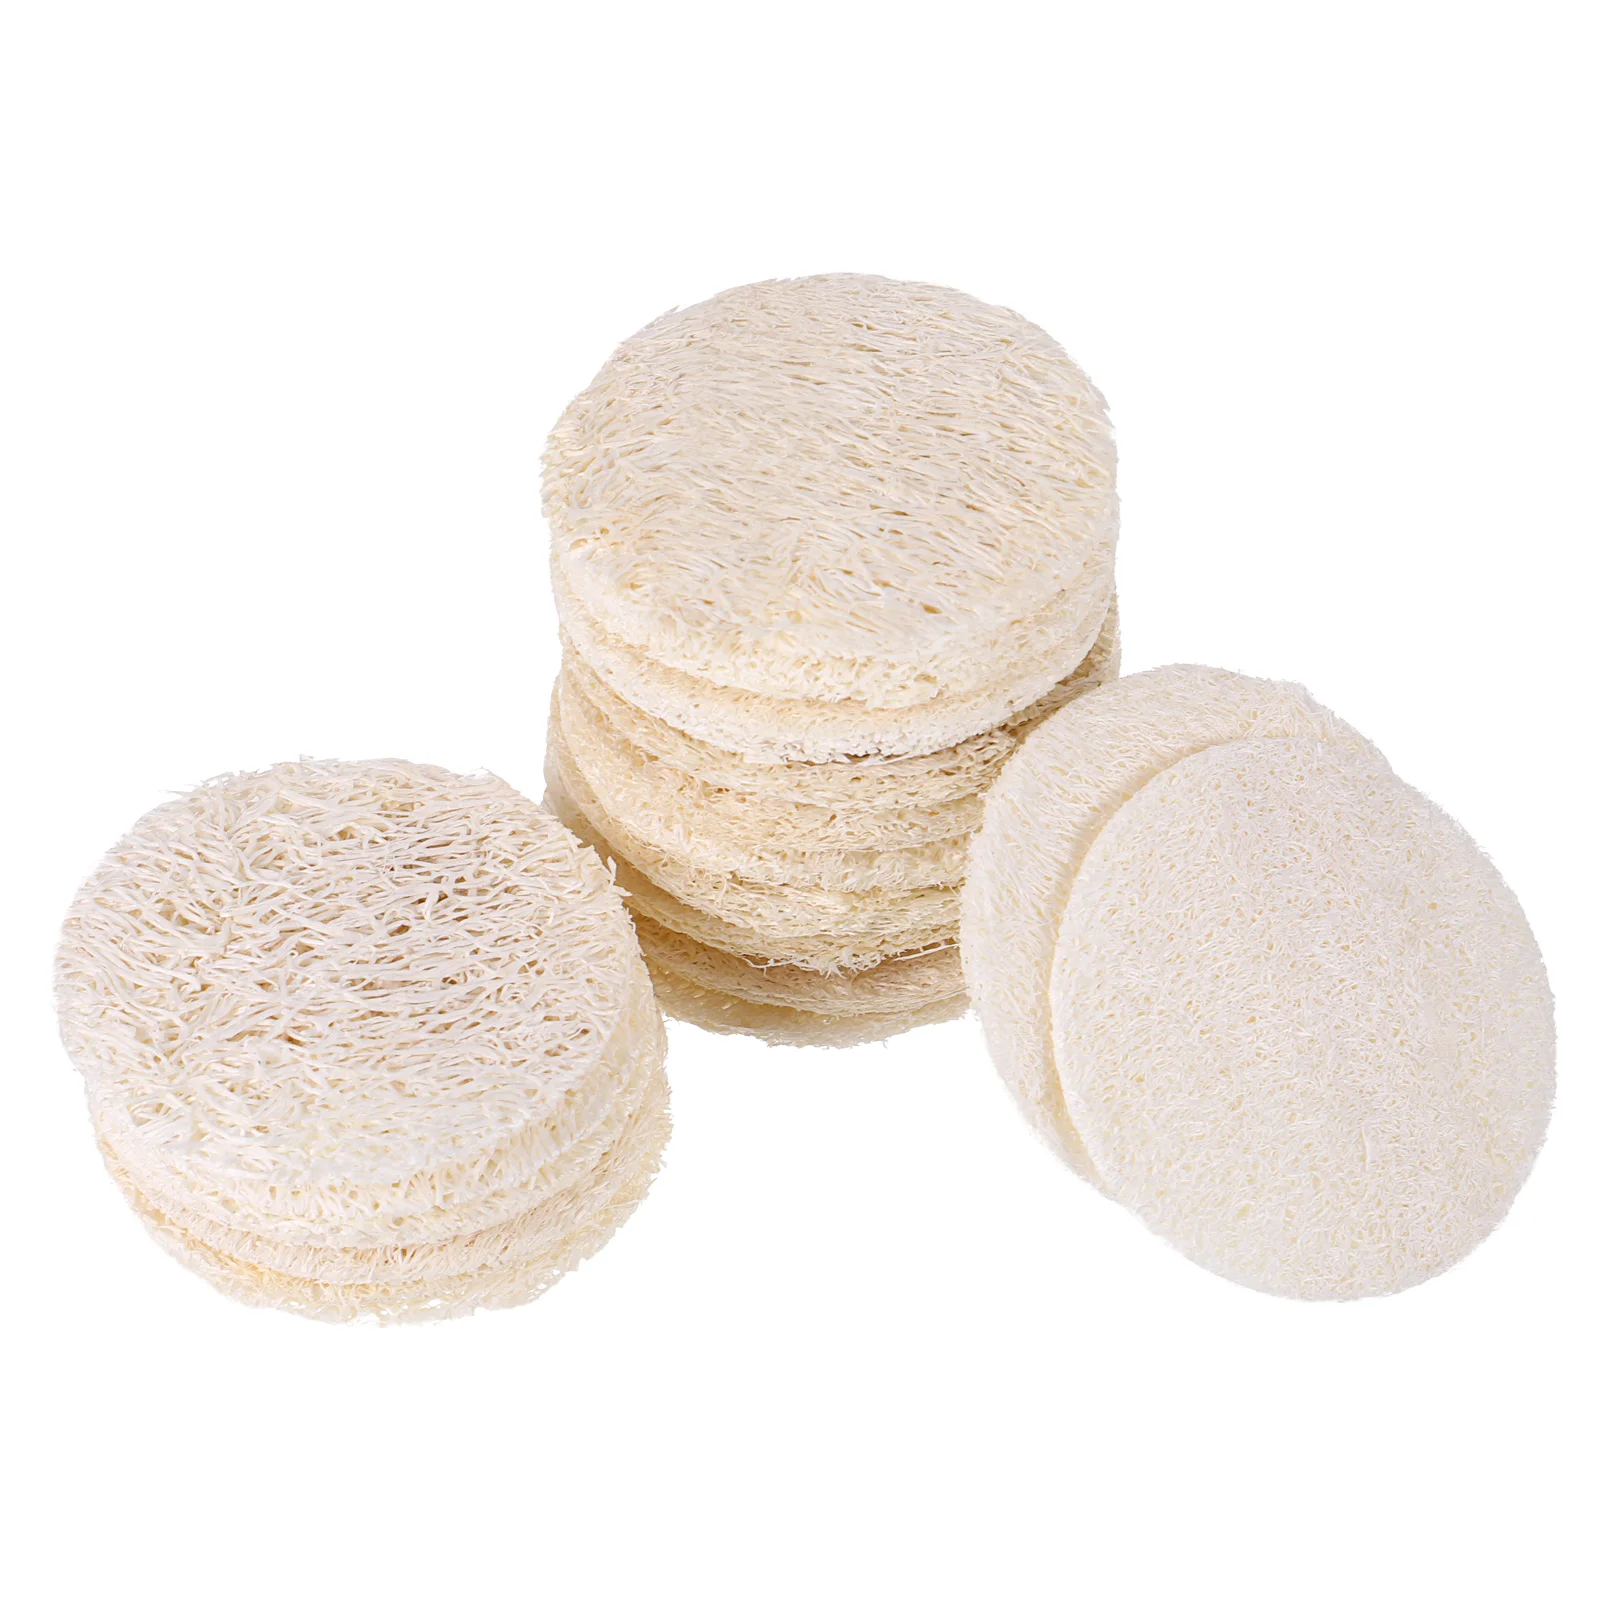 

Body Scrubbing Pads Face Cleaning Loofah Cleansing Skin Exfoliating Scrubbers Facial Wash Makeup Removing Sponges Bathing